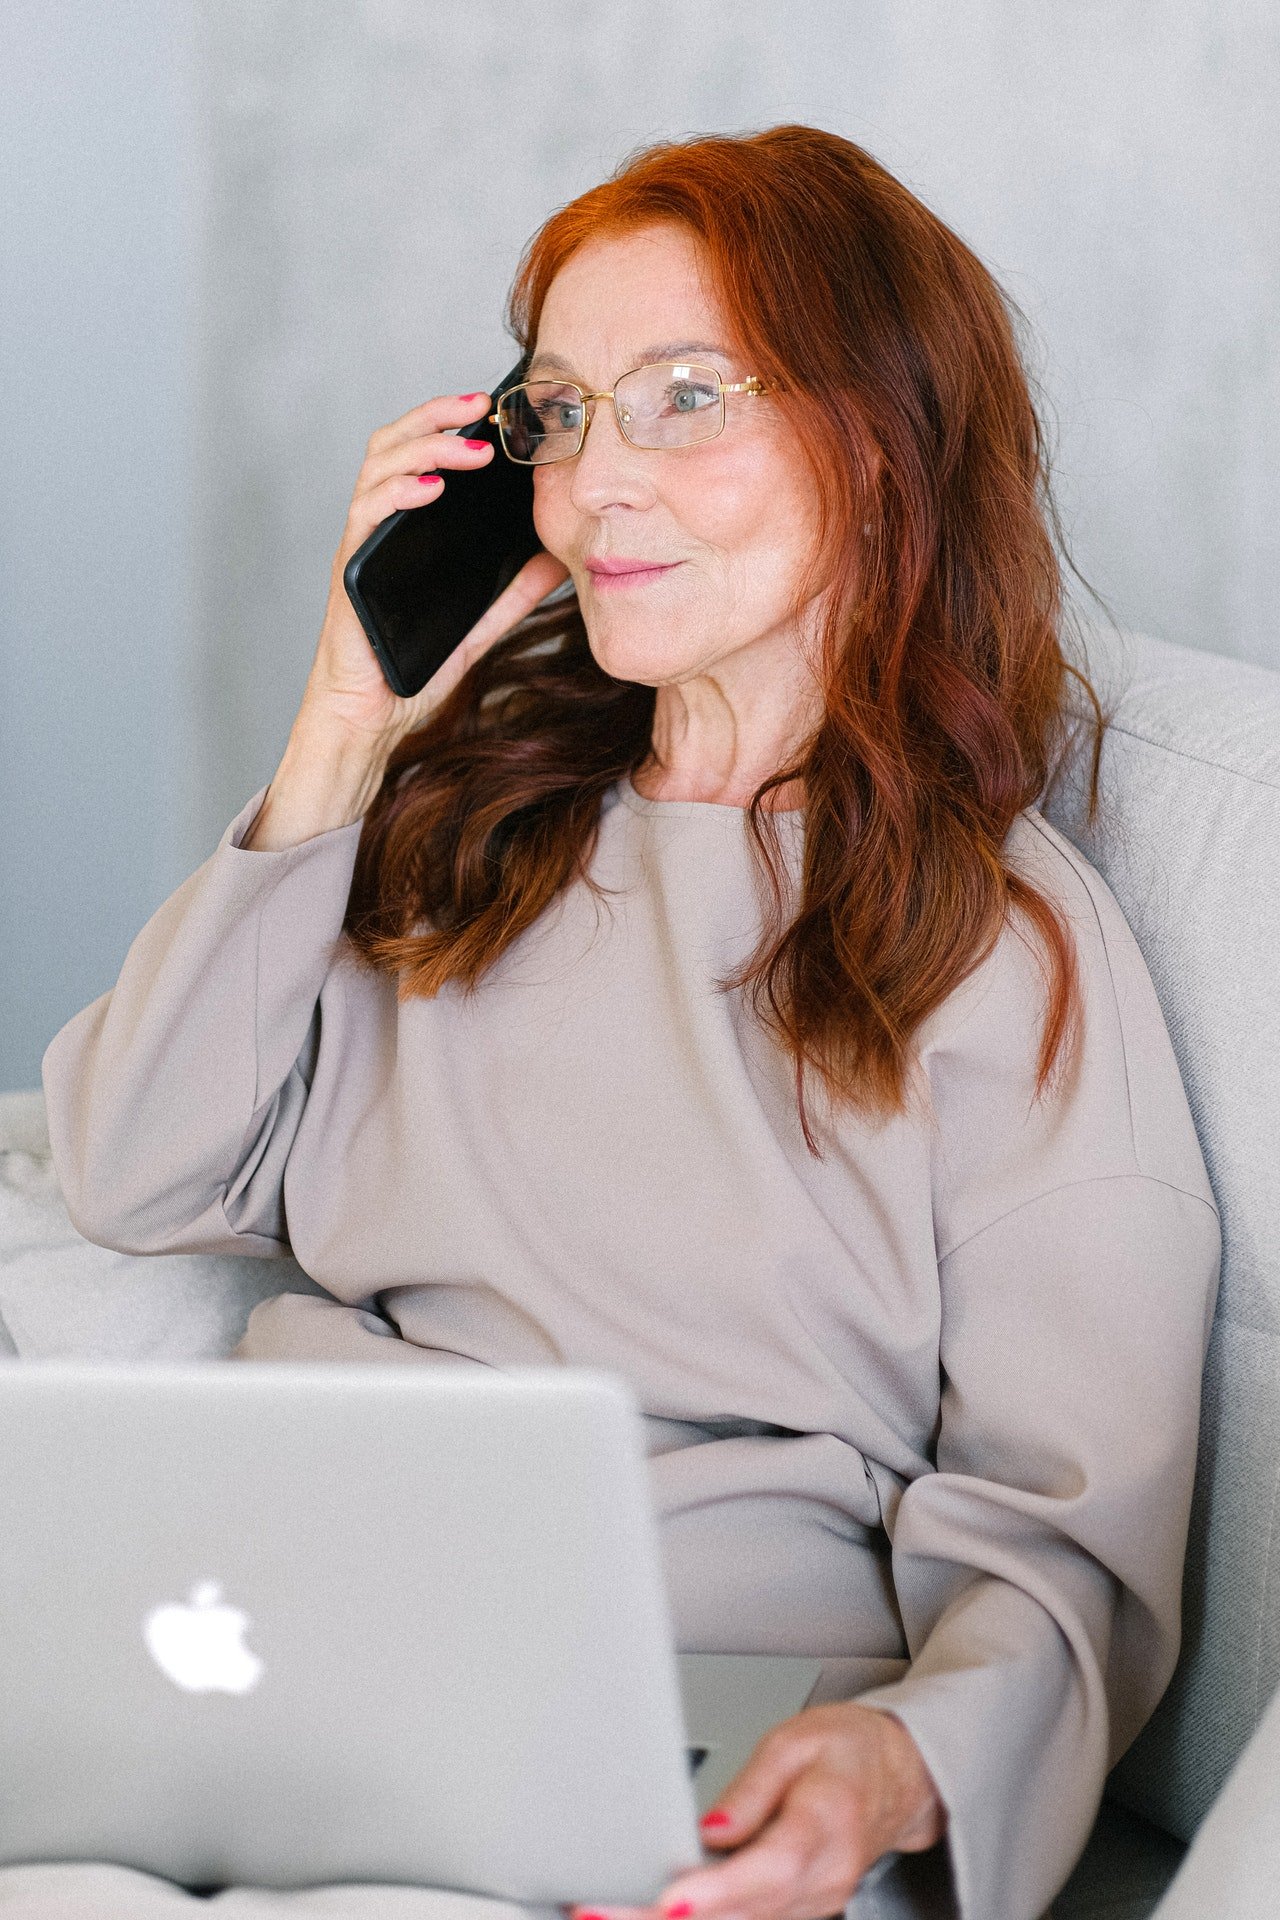 Laura called Sophie, but she was too busy. | Source: Pexels